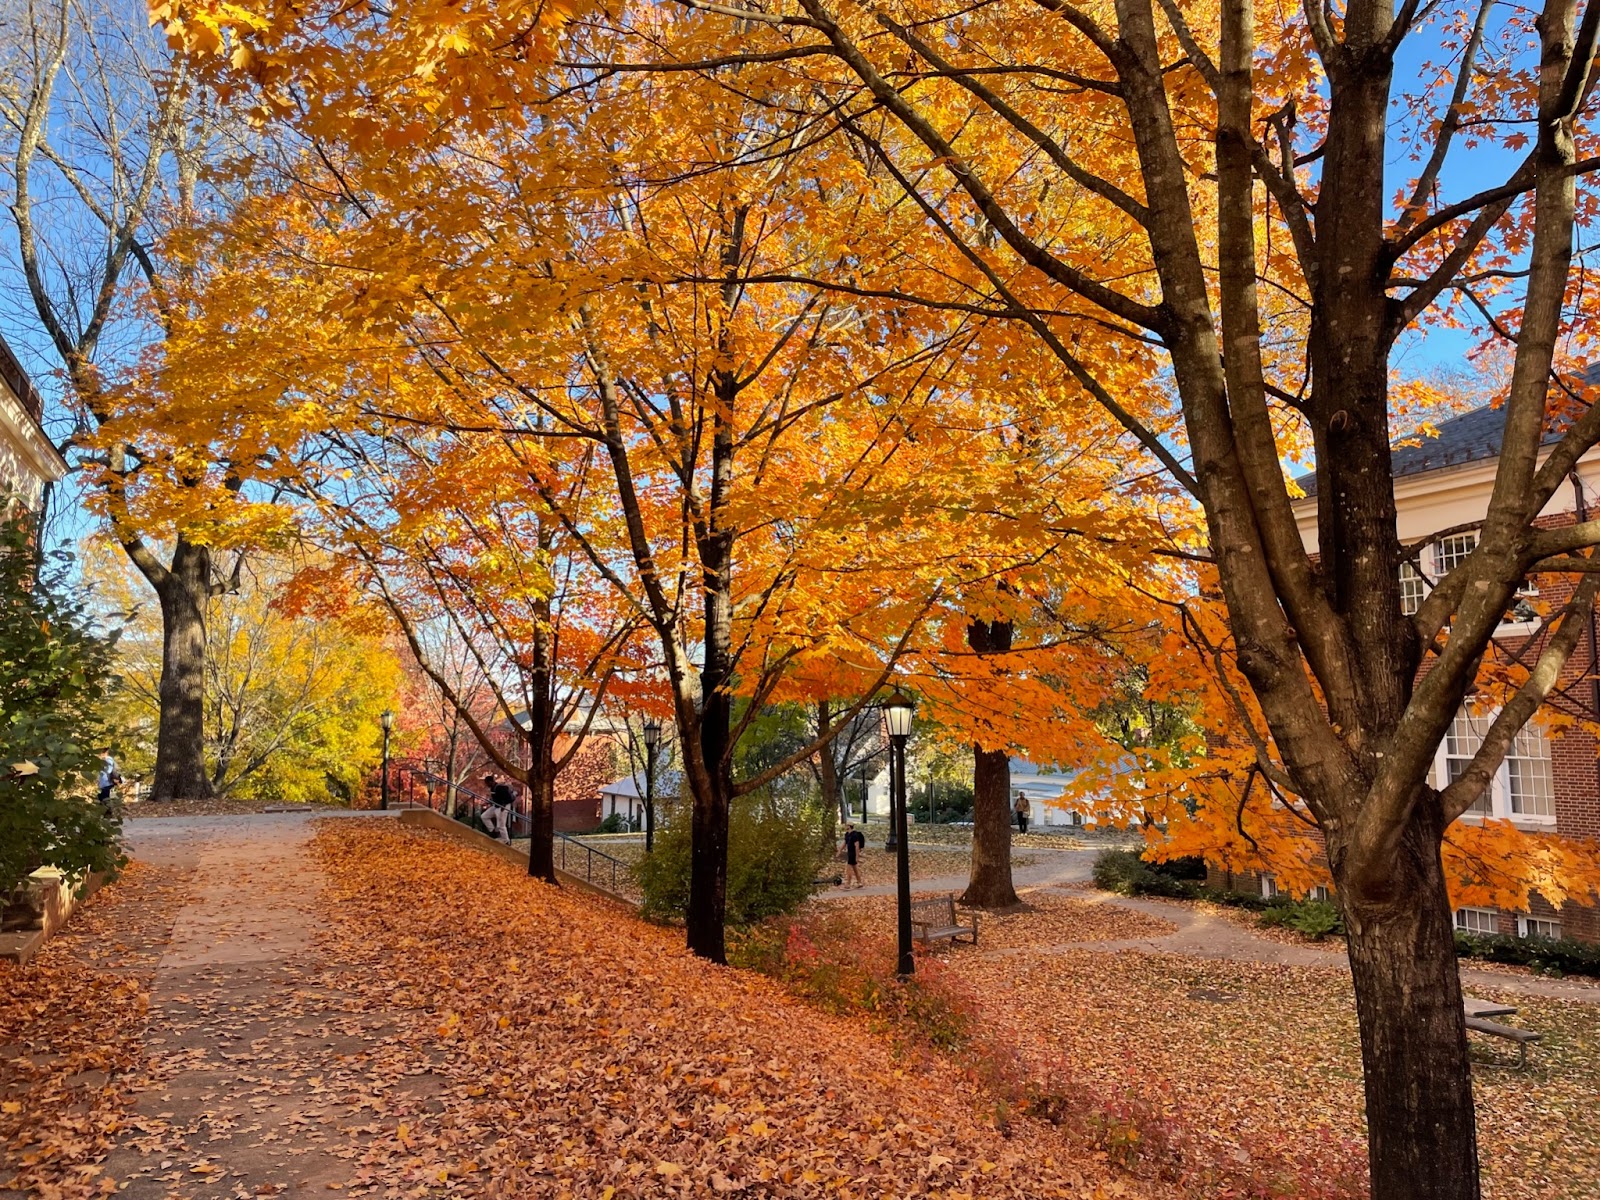 a path with orange leaves on trees